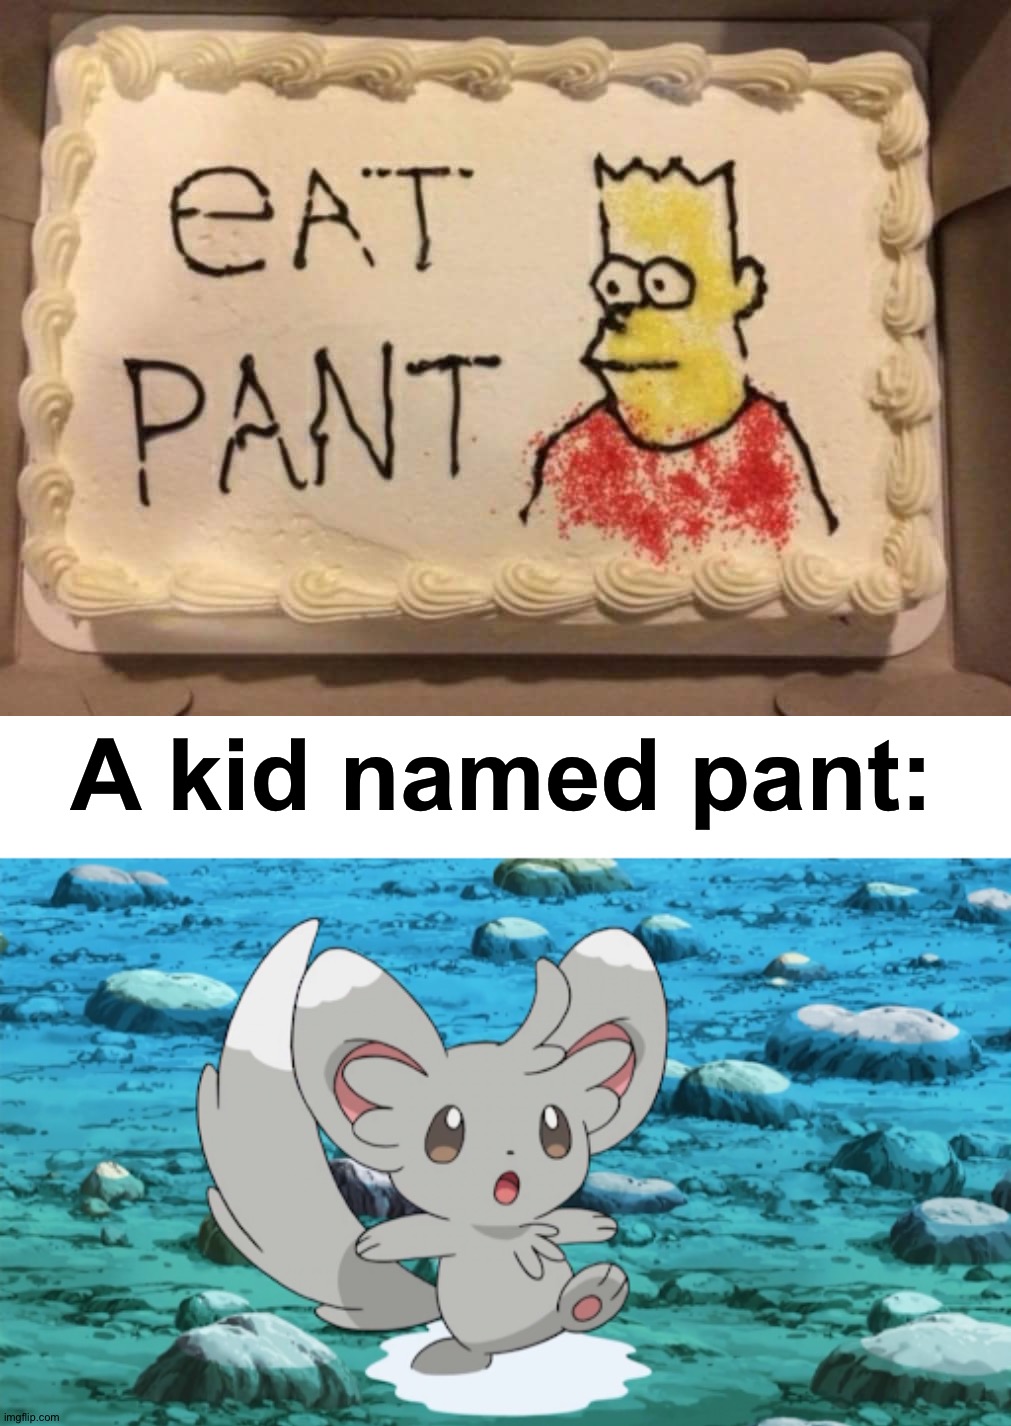 I wonder if this will reach front page... No need to upvote if you hate beggars... | A kid named pant: | image tagged in memes,funny,funny memes,gifs,the simpsons,wtf | made w/ Imgflip meme maker